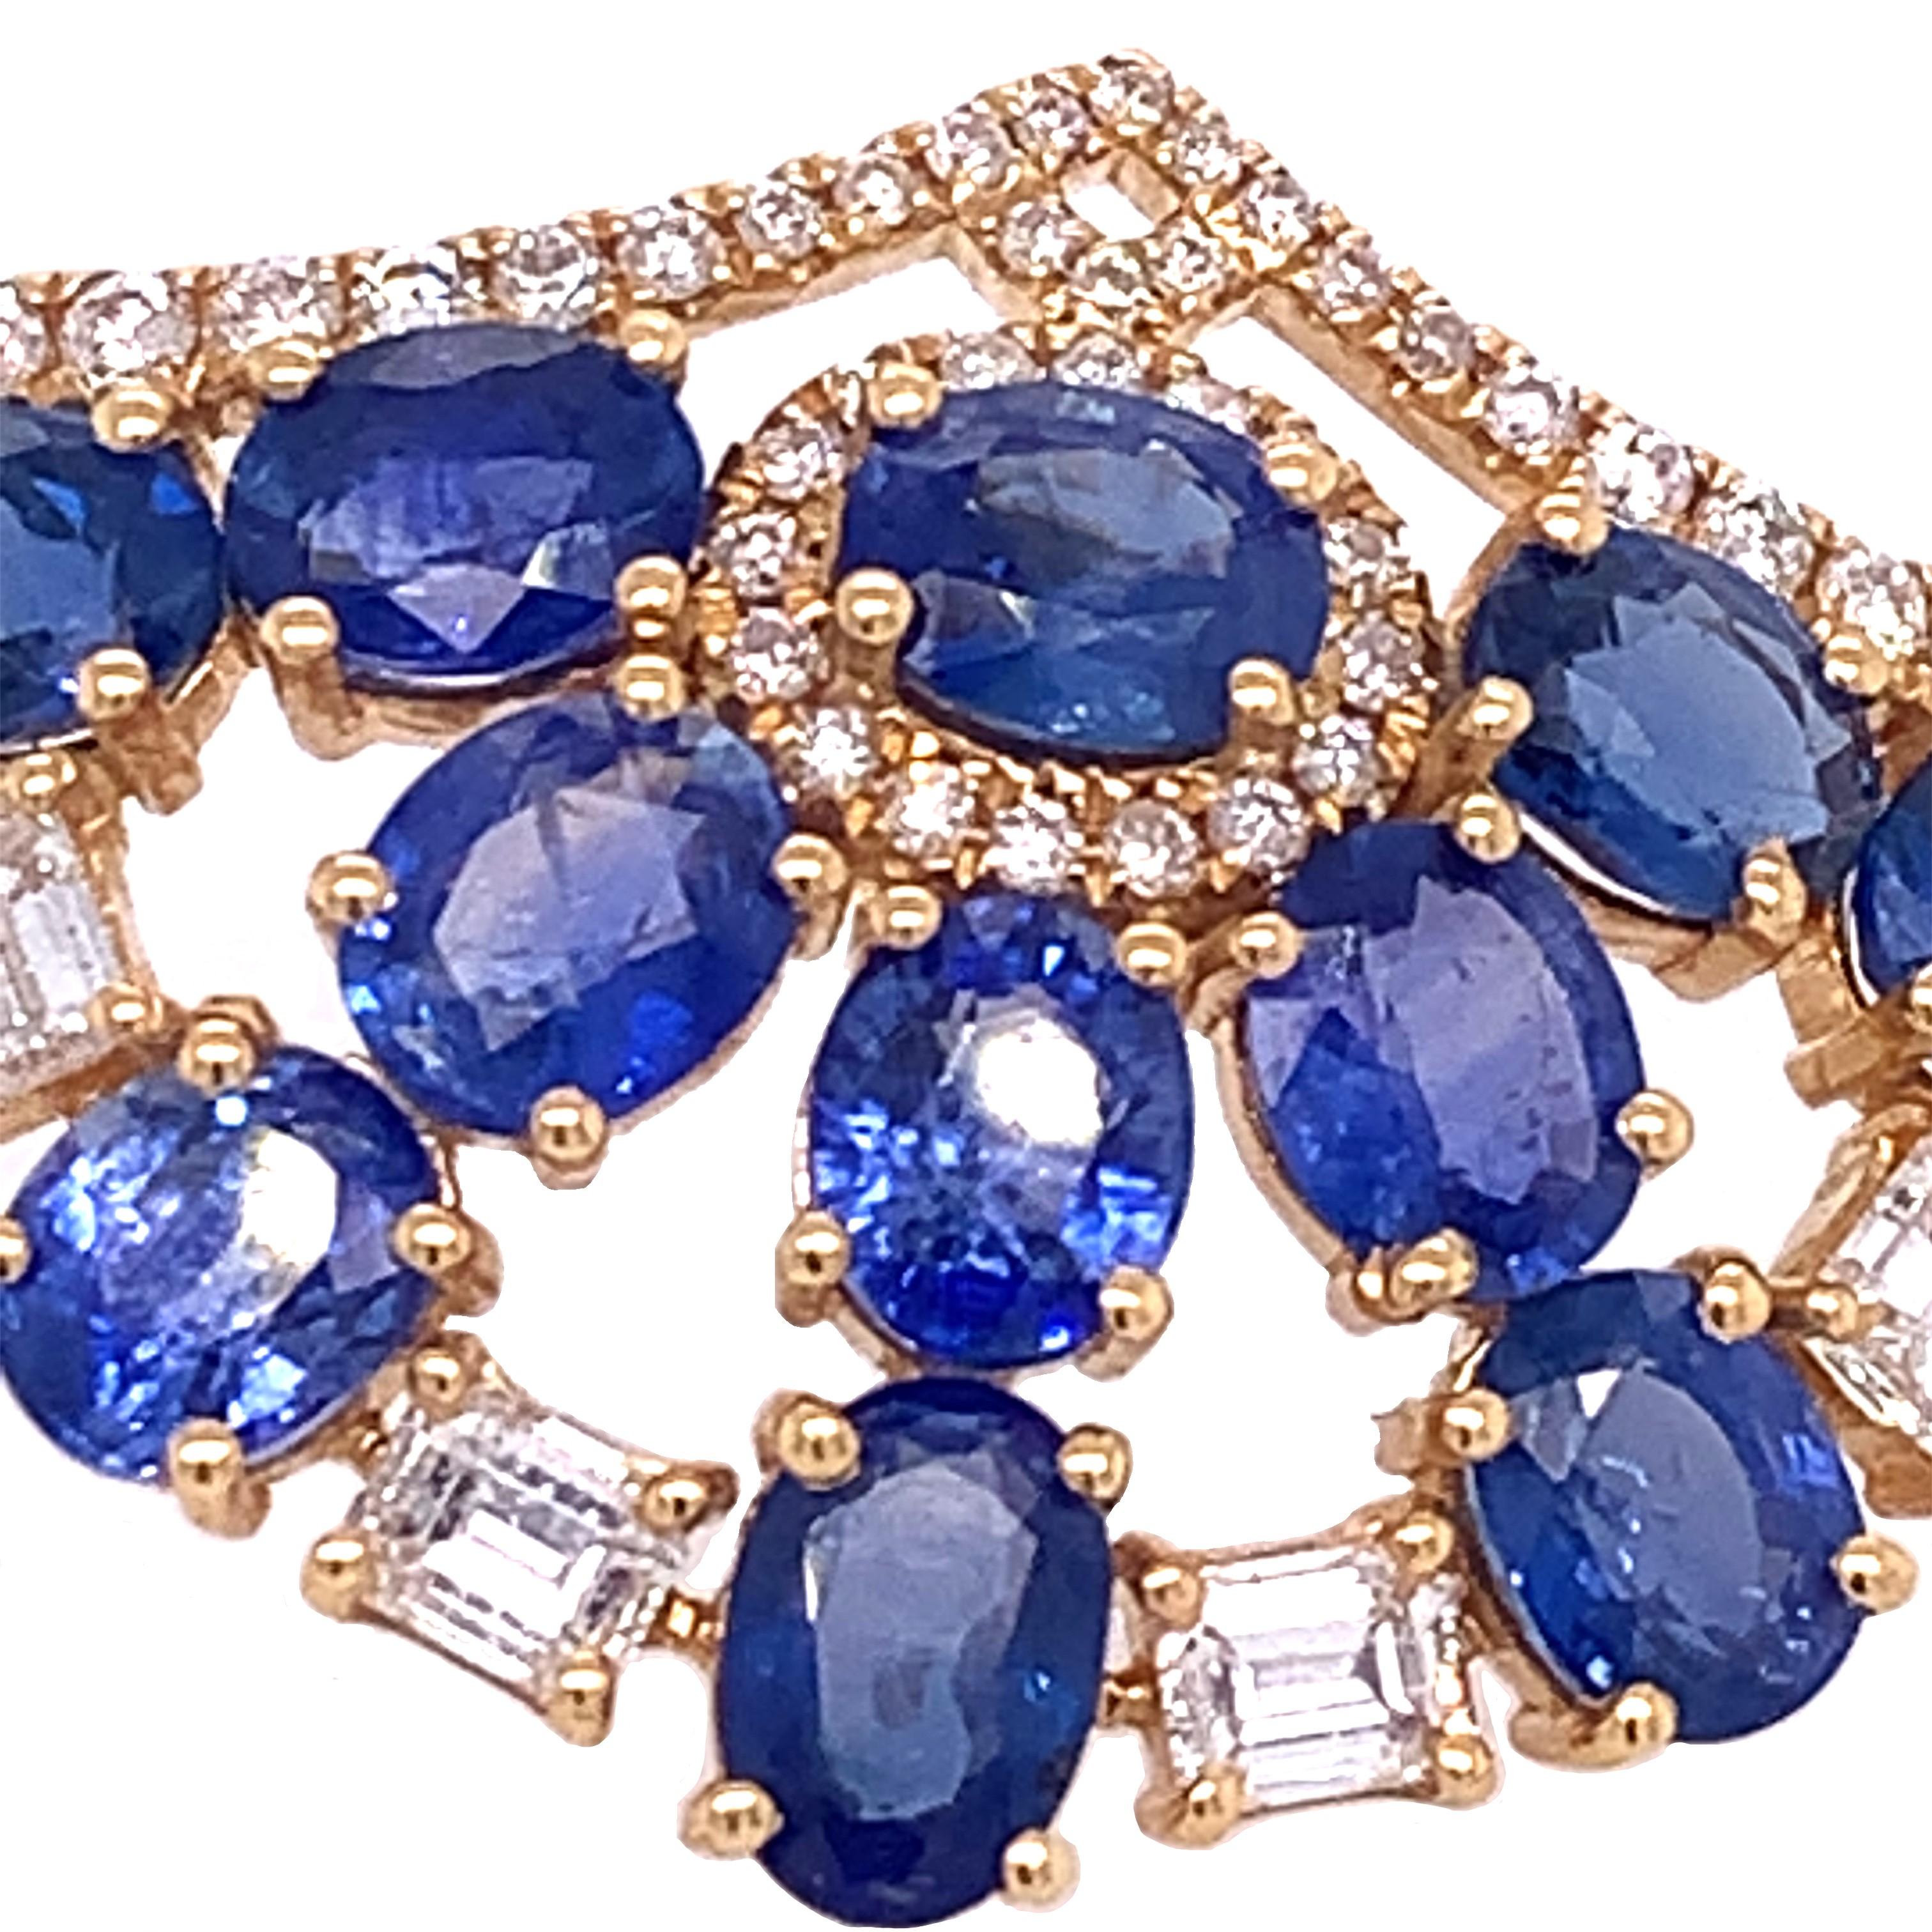 18K Yellow Gold
Blue Sapphire: 11.11ct total weight.
Diamond: 1.50ct total weight.
All diamonds are G-H/SI stones.